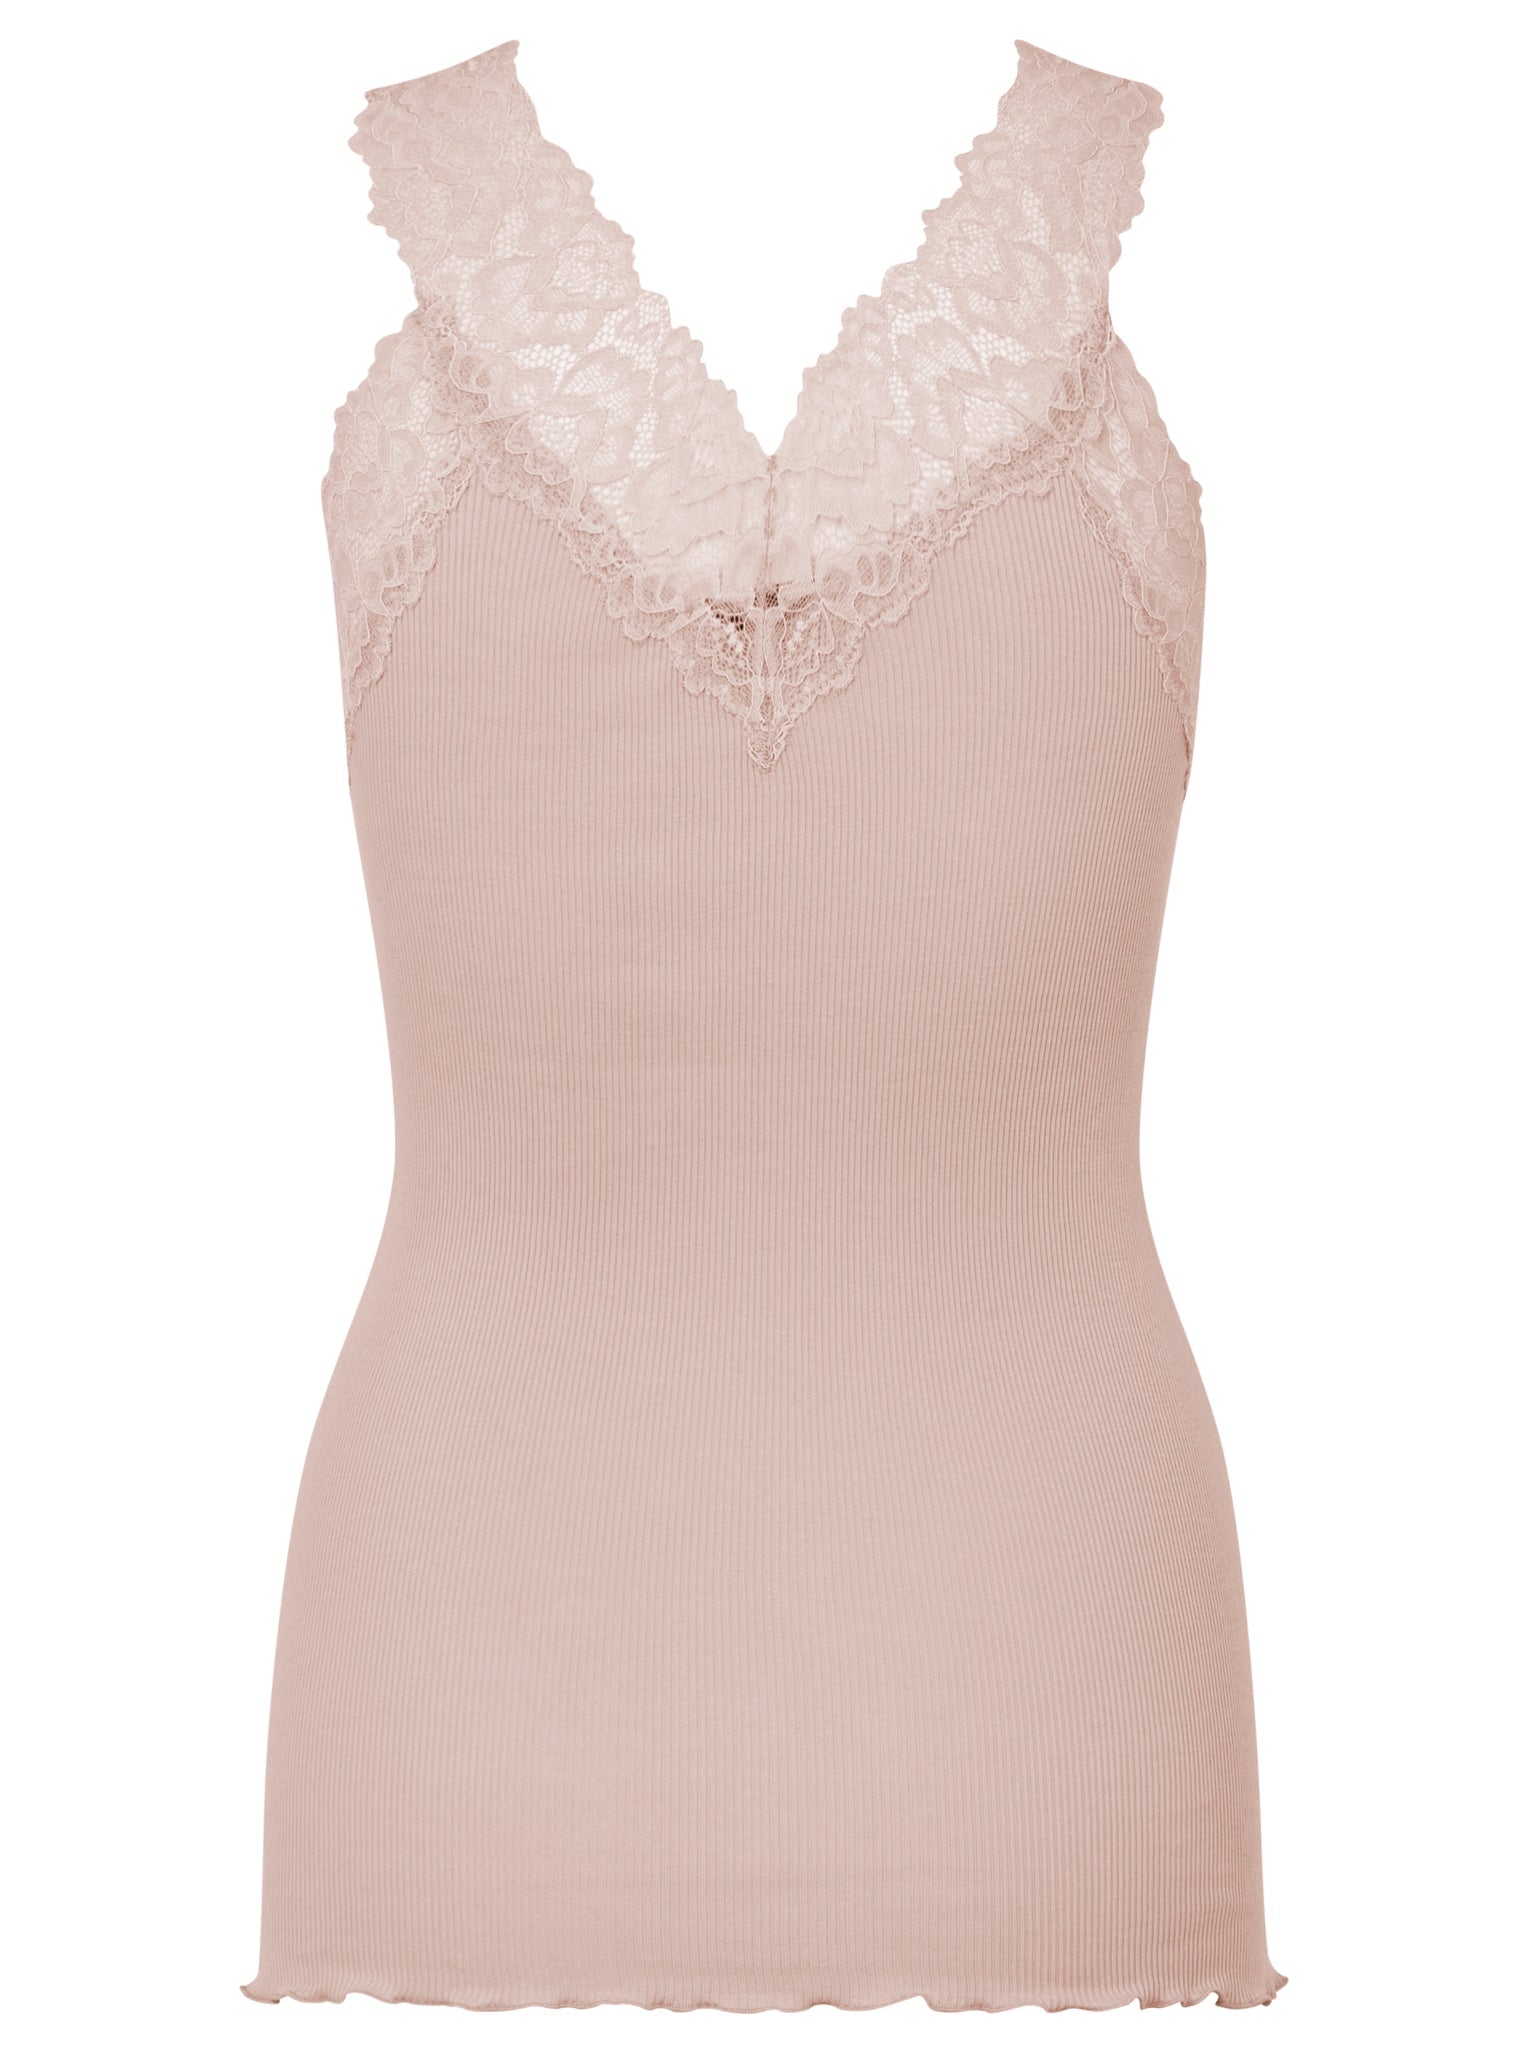 Organic top with lace